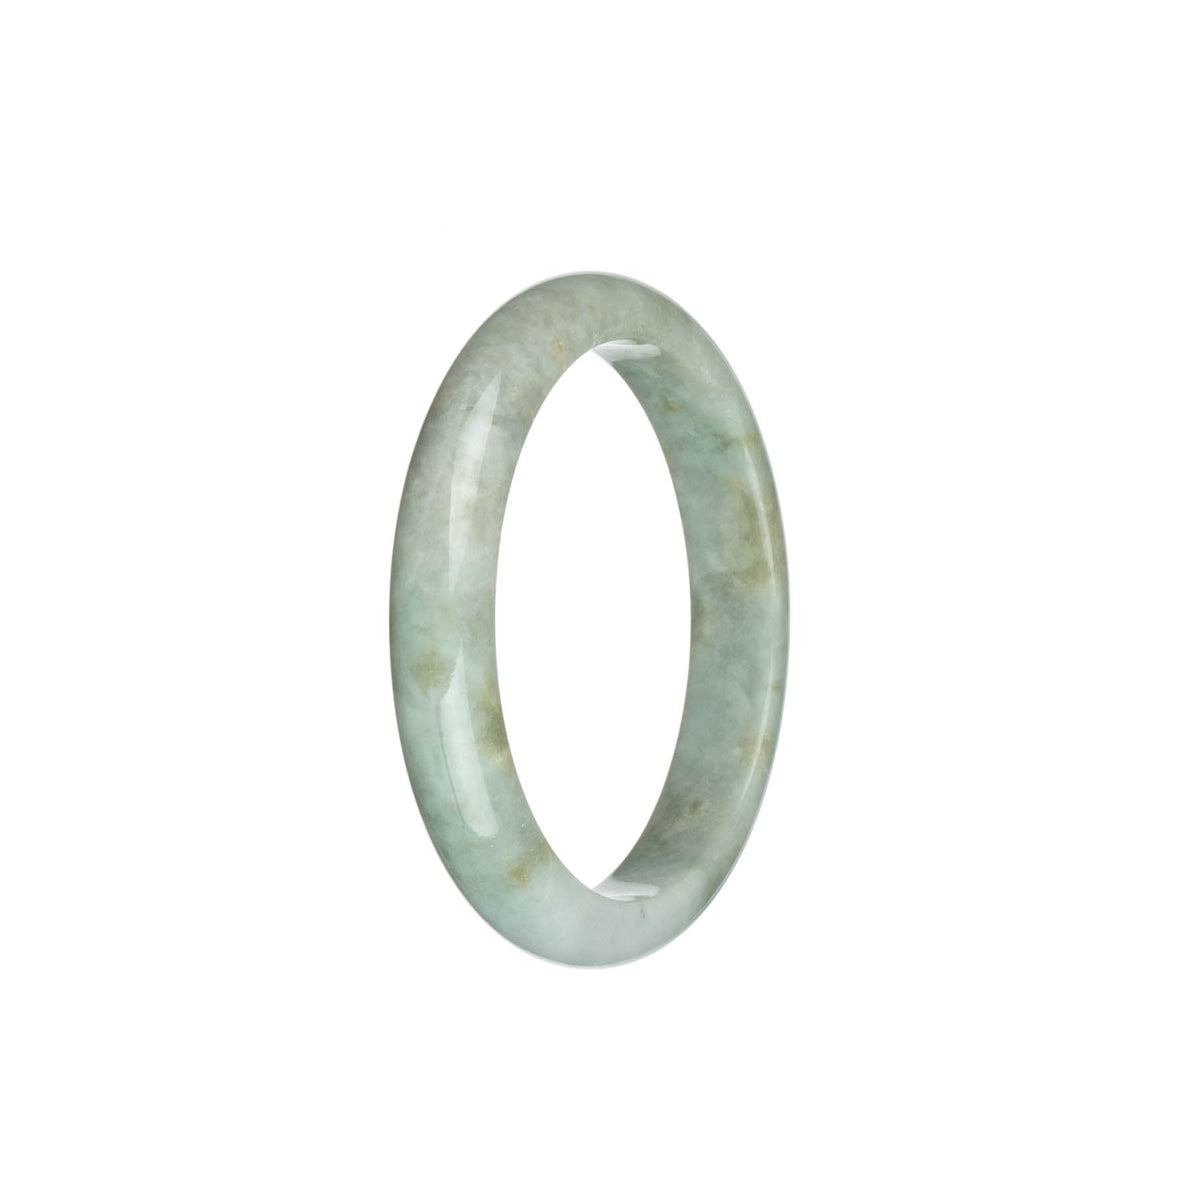 A beautiful light grey Burma Jade bracelet with pale green and brown spots, certified Grade A. The bracelet features a 54mm half moon design.